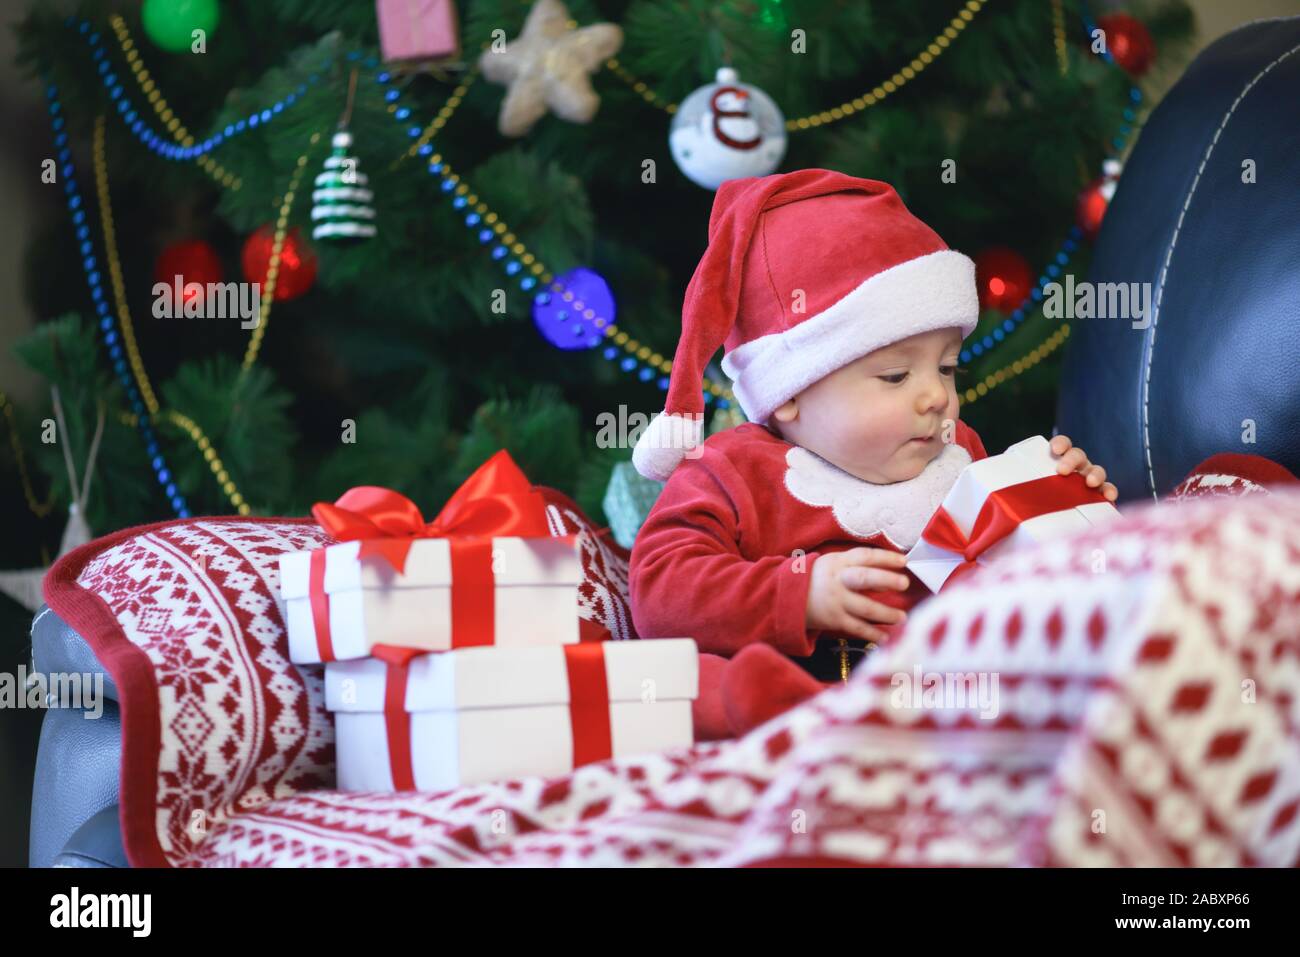 Baby boy in Santas clothes holding Christmas present gift box in front of Christmas tree Stock Photo